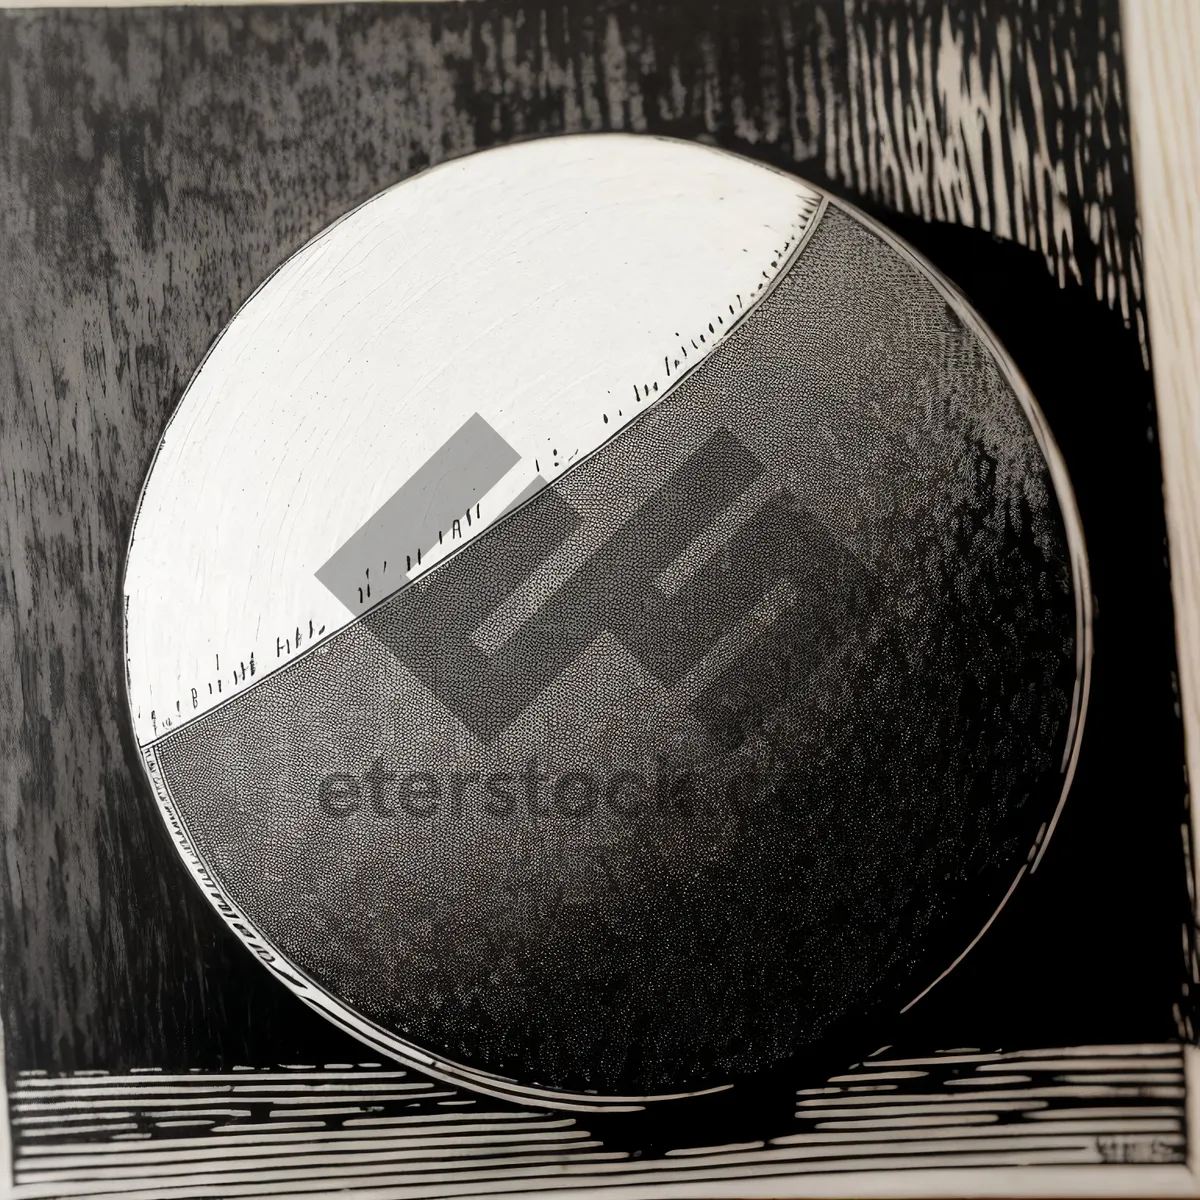 Rugby Equipment: Ball for Intense Games